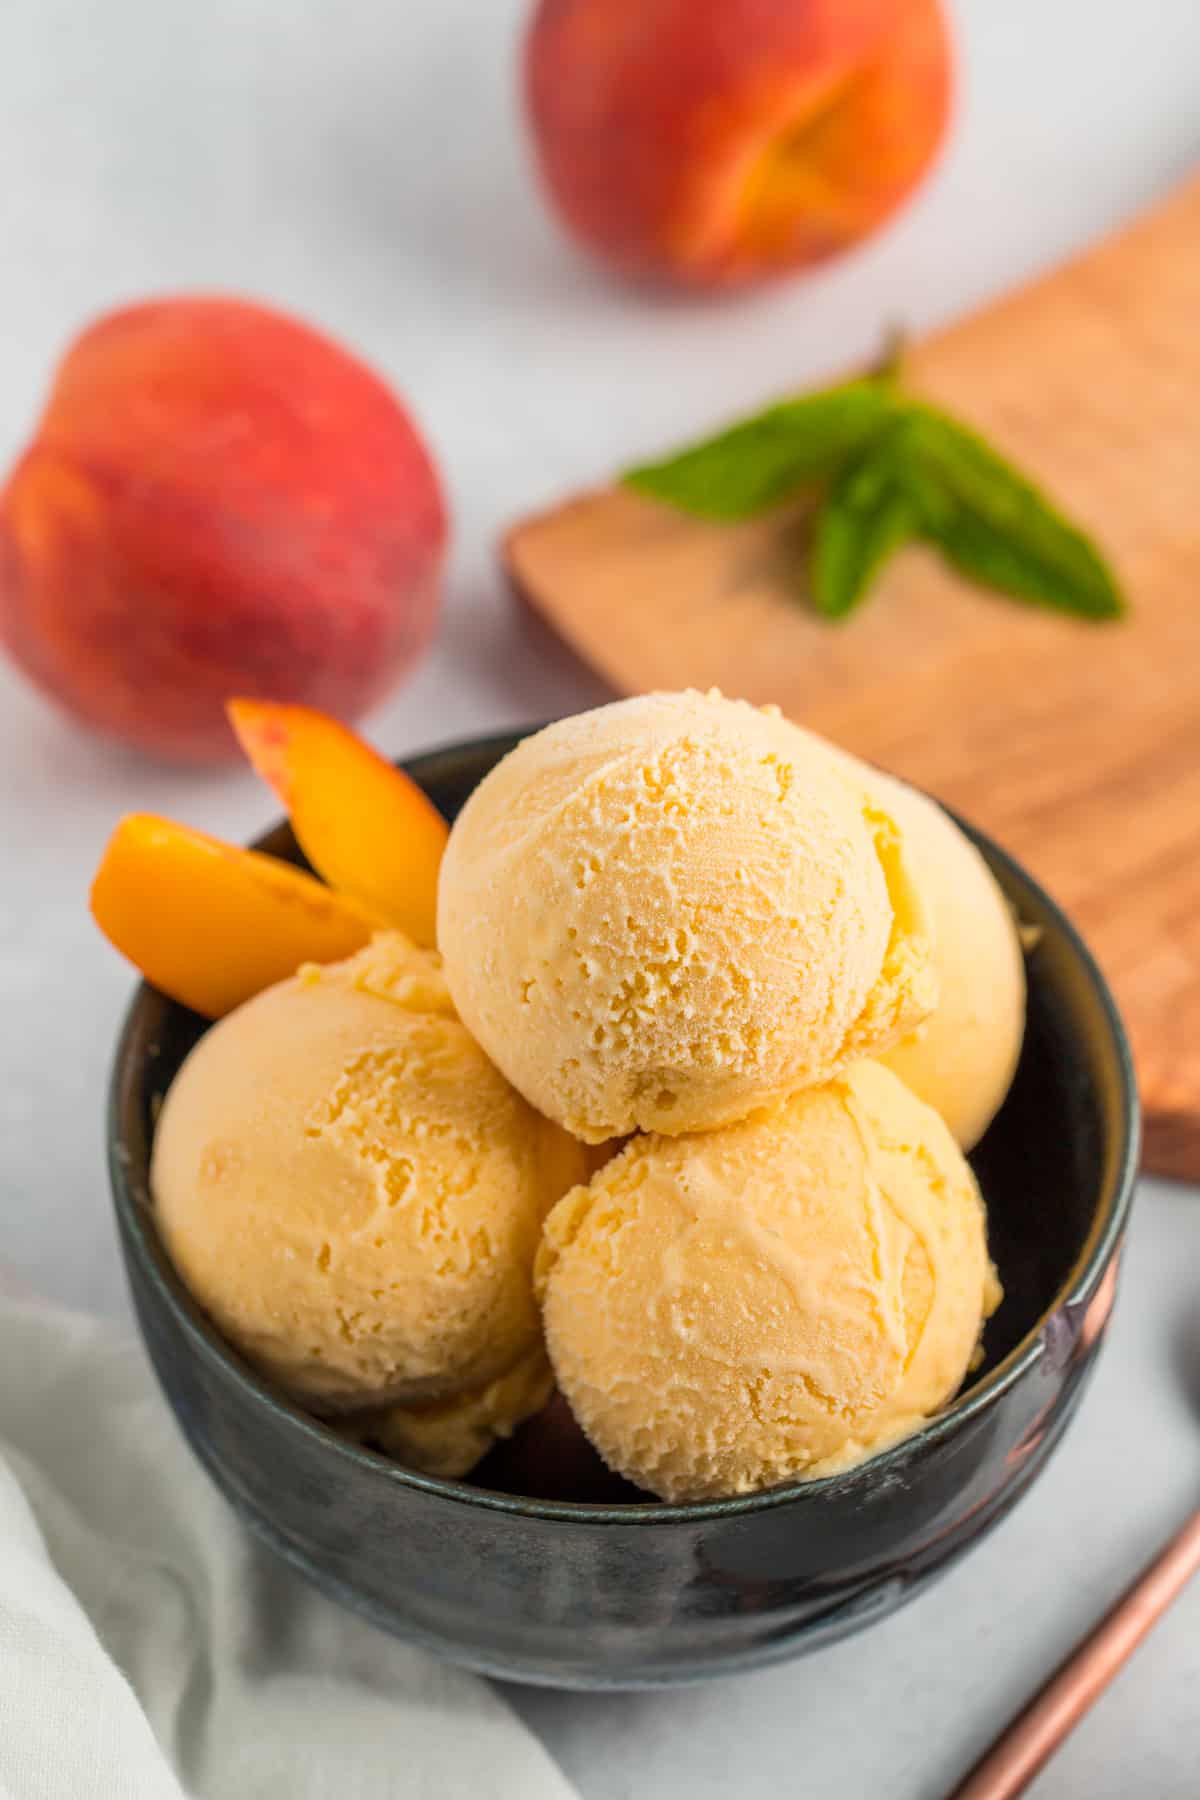 a blue bowl with multiple scoops of homemade peach ice cream, with whole peaches.